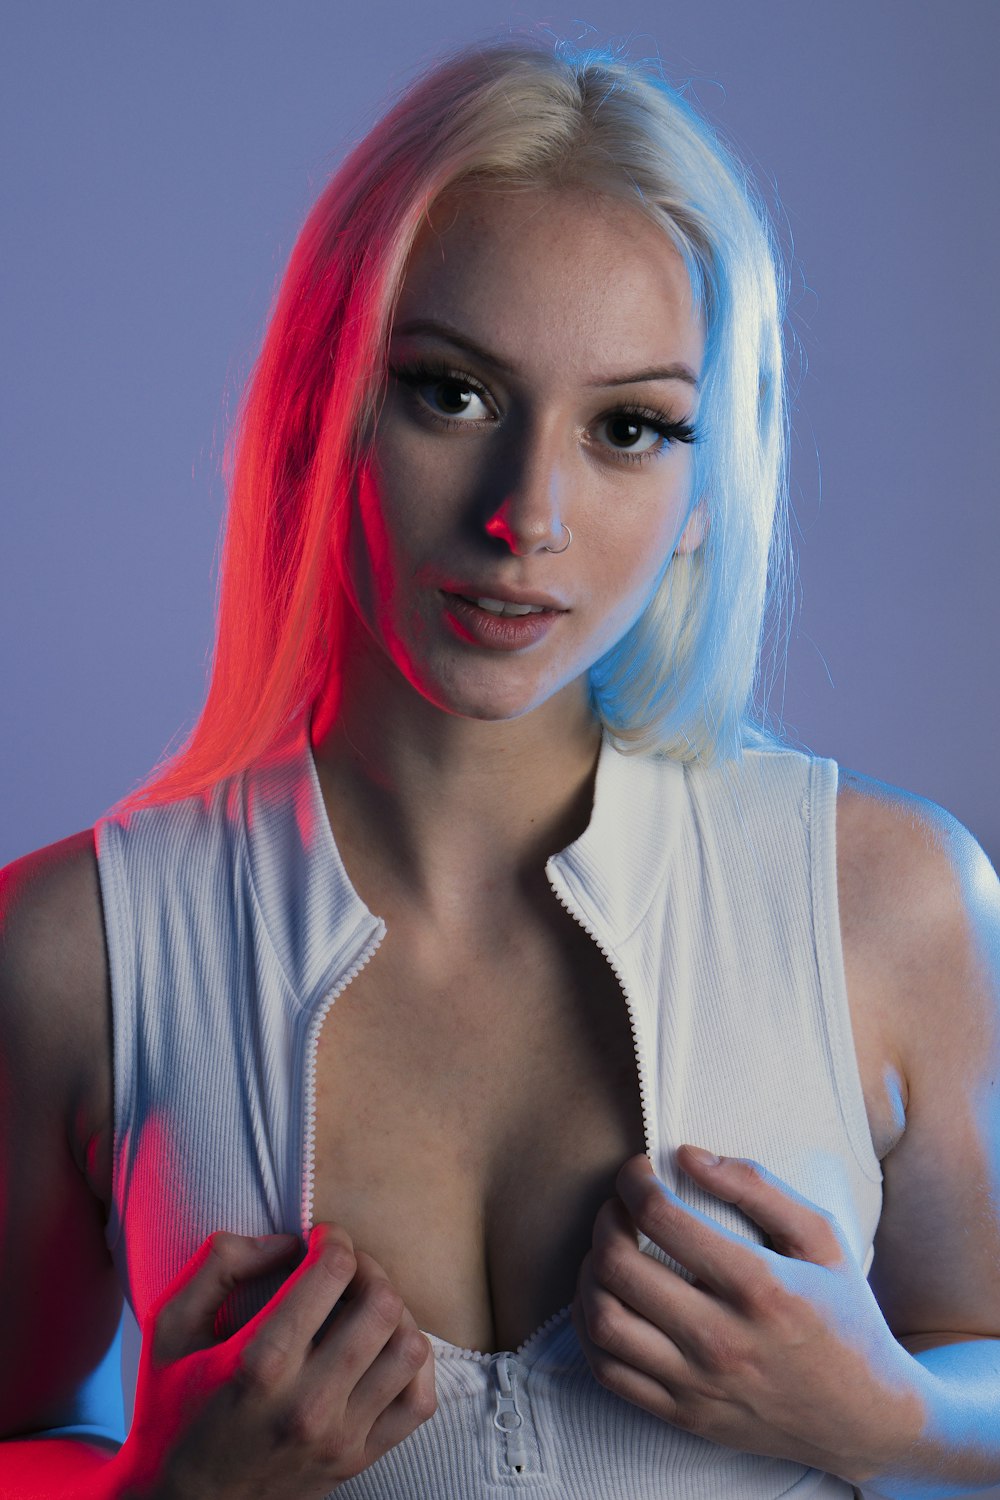 a woman with blue and pink hair wearing a white shirt